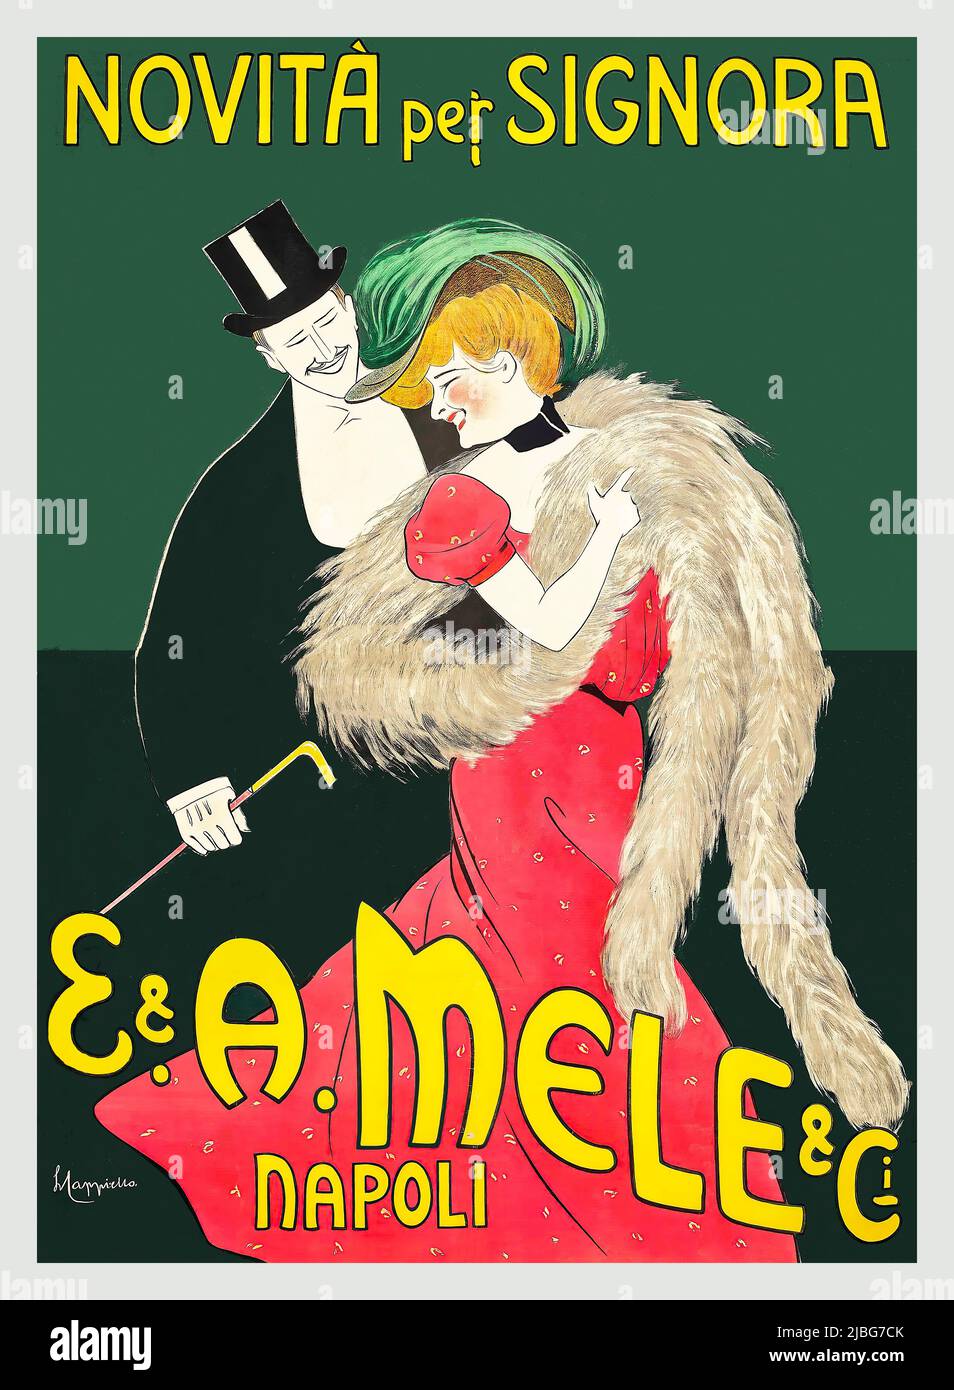 A turn of the 20th century advertising poster by Leonetto Cappiello (1875-1942), for the Italian  Neapolitan department store Mele, in Naples  promoting new fashions for women. Stock Photo